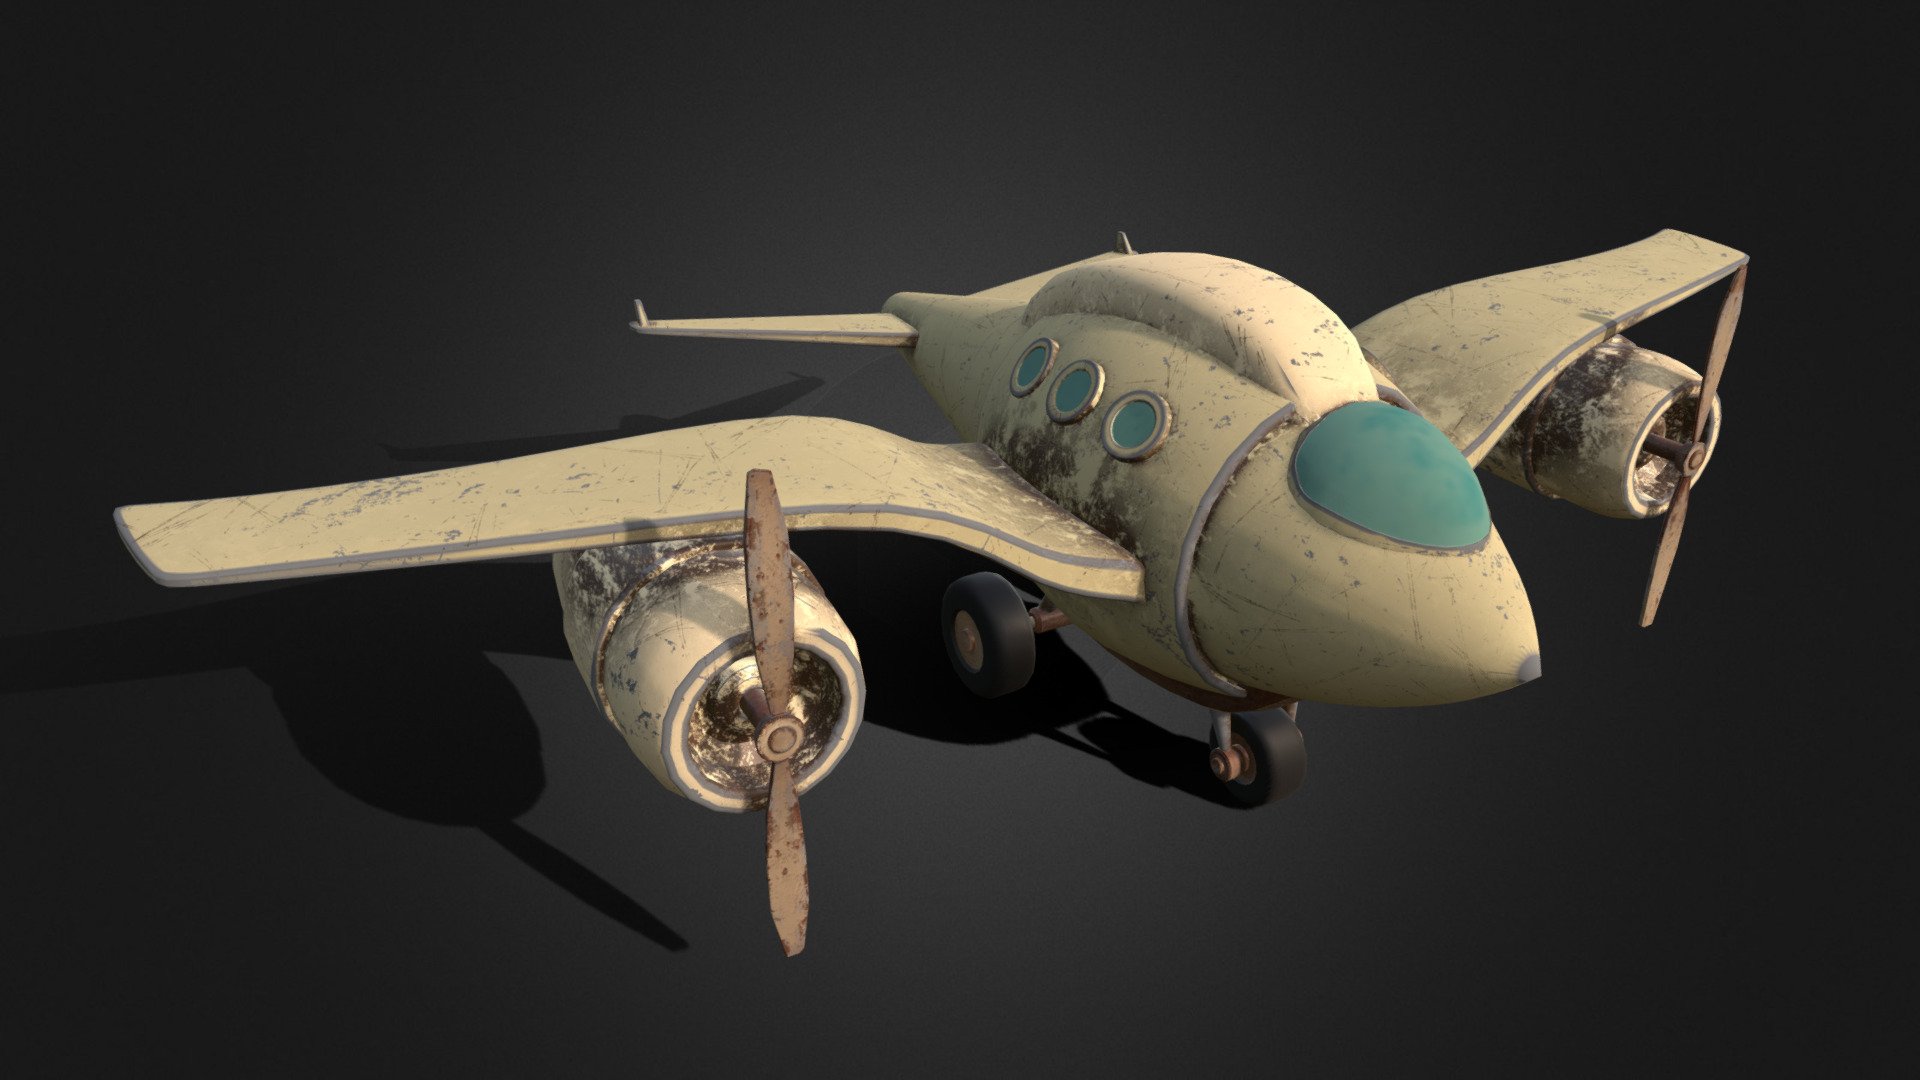 Fat Seagull Stylized Cartoony plane model made in 3ds Max 2022 and textured in Substance Painter. Model has 14207 polygons and 14399 vertices.

Model details:


Model pack contains .fbx / .max / .blend and .obj file formats
Textures aren’t embedded into each format and have to be plugged in manually
Nothing is rigged, nothing is animated
Fbx files are provided for 2014/2015, 2016/2017 and 2020 fbx versions
Model doesn’t have any overlapping UVs, there are parts with overlapping geometry
All model elements share a single UV set. Everything is named properly
Engines are centered to their centers, propellers are centered to their axis etc
Dusty textures come in 8 bit 4k, Cartoony textures come in 8 bit 2k
Texture pack contains .png textures of 2 color schemes optimized for Arnold, Vray, Corona, UnityHDmetal + .png/.jpeg and .targa files optimized for UE4

Link to the second color scheme will be provided here: https://sketchfab.com/3d-models/843cd425559945a4a91a59418f0e3ded

Best wishes:D - Dusty "Fat Seagull" Stylized Cartoony plane - 3D model by Art-Teeves 3d model